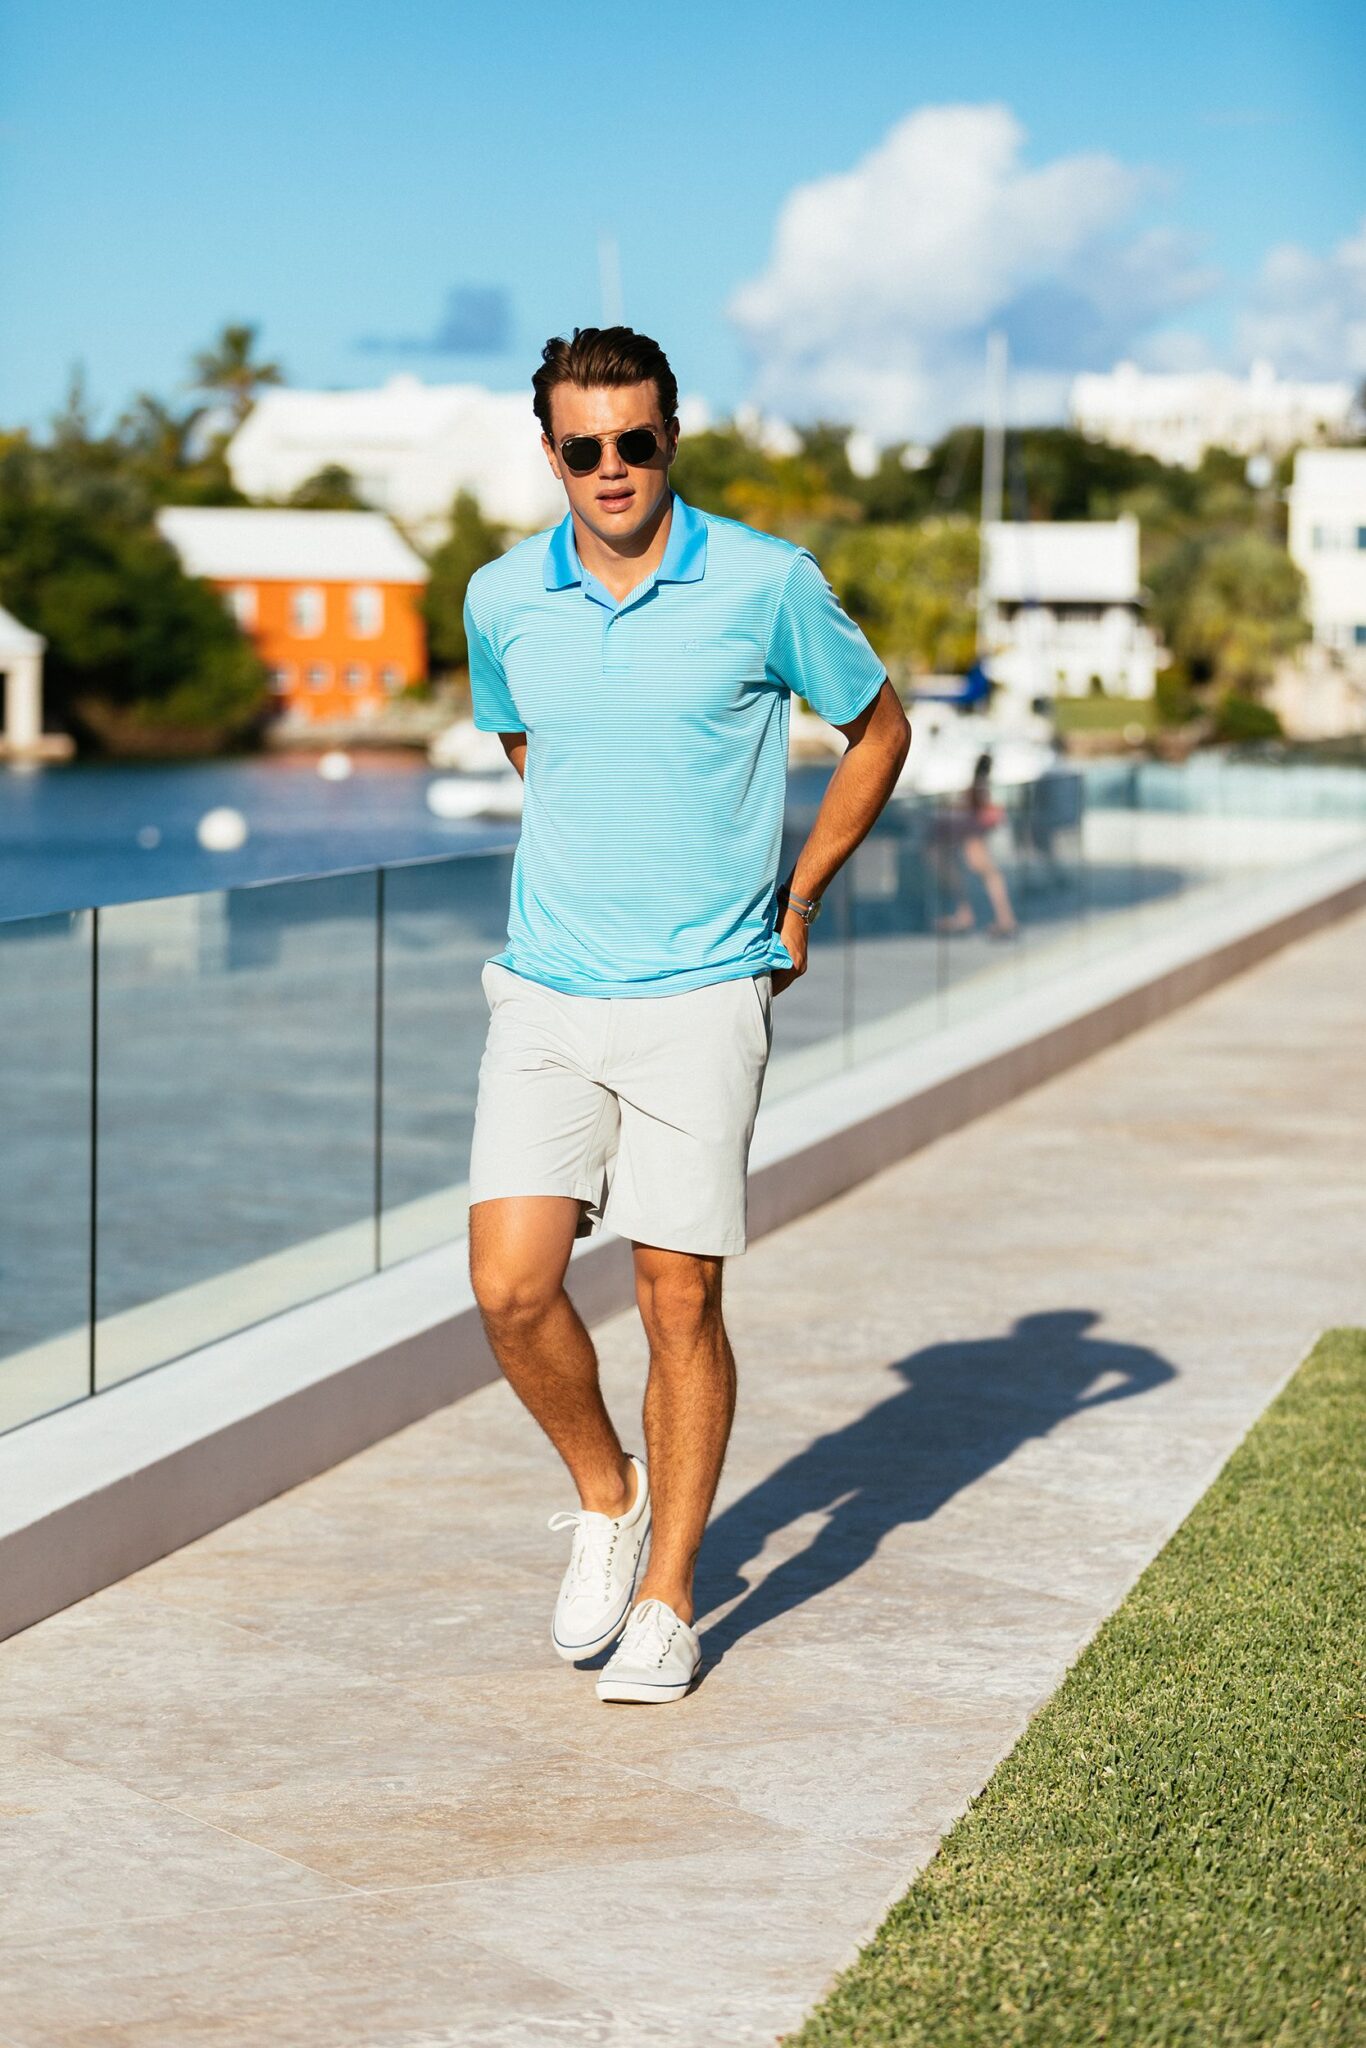 What To Wear To A Water Park for Men? 20 Outfit Ideas